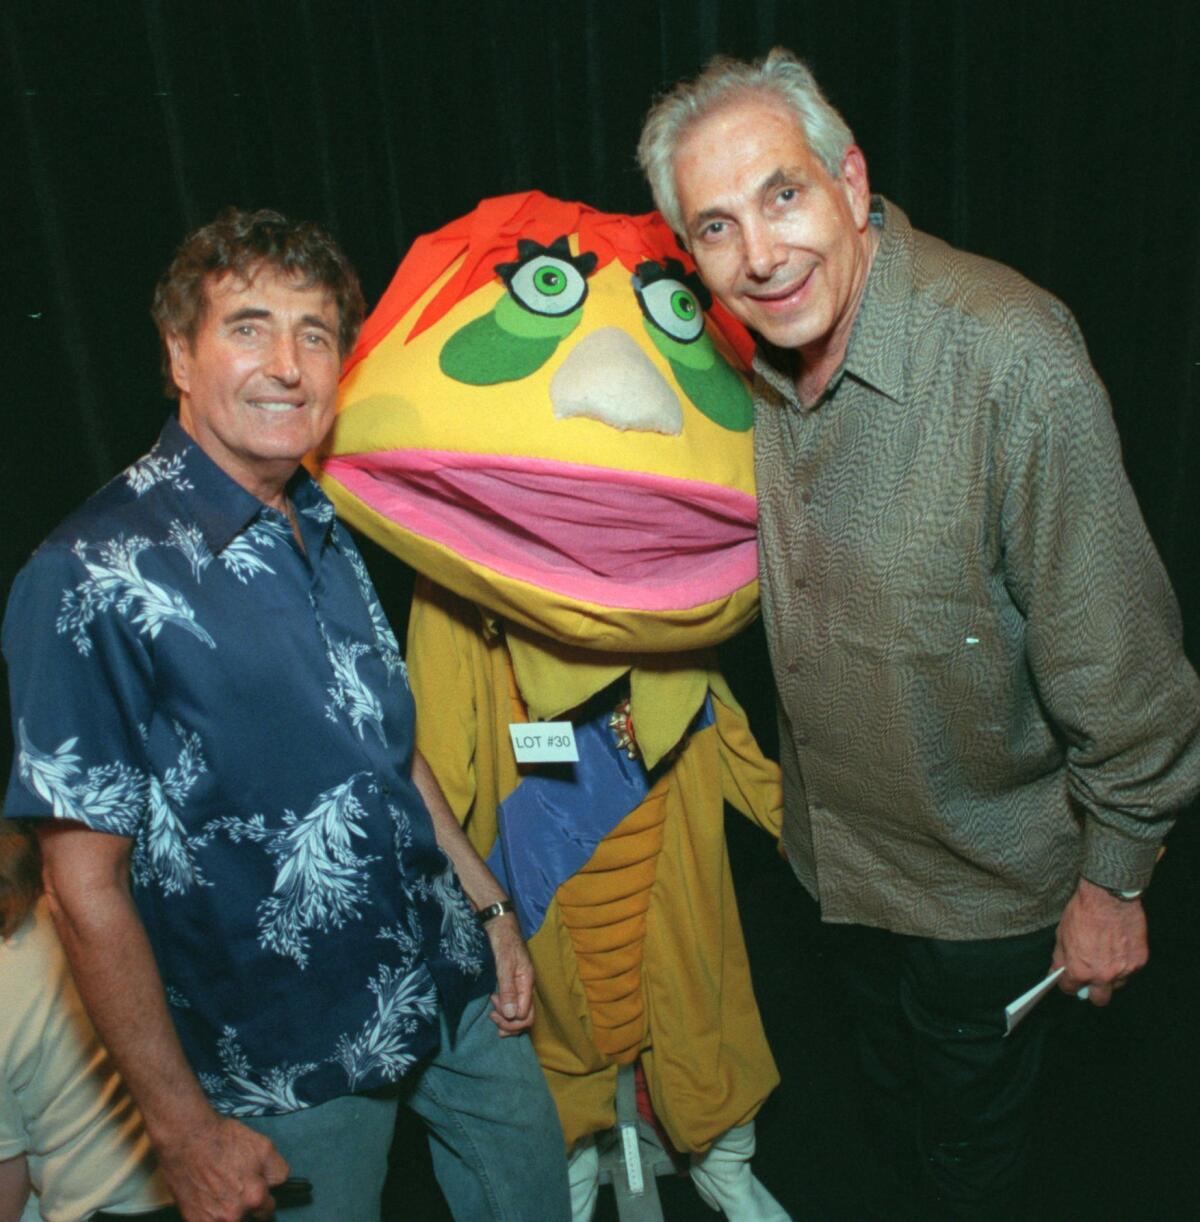 Sid, left, and Marty Krofft stand next to a man dressed as a puppet.